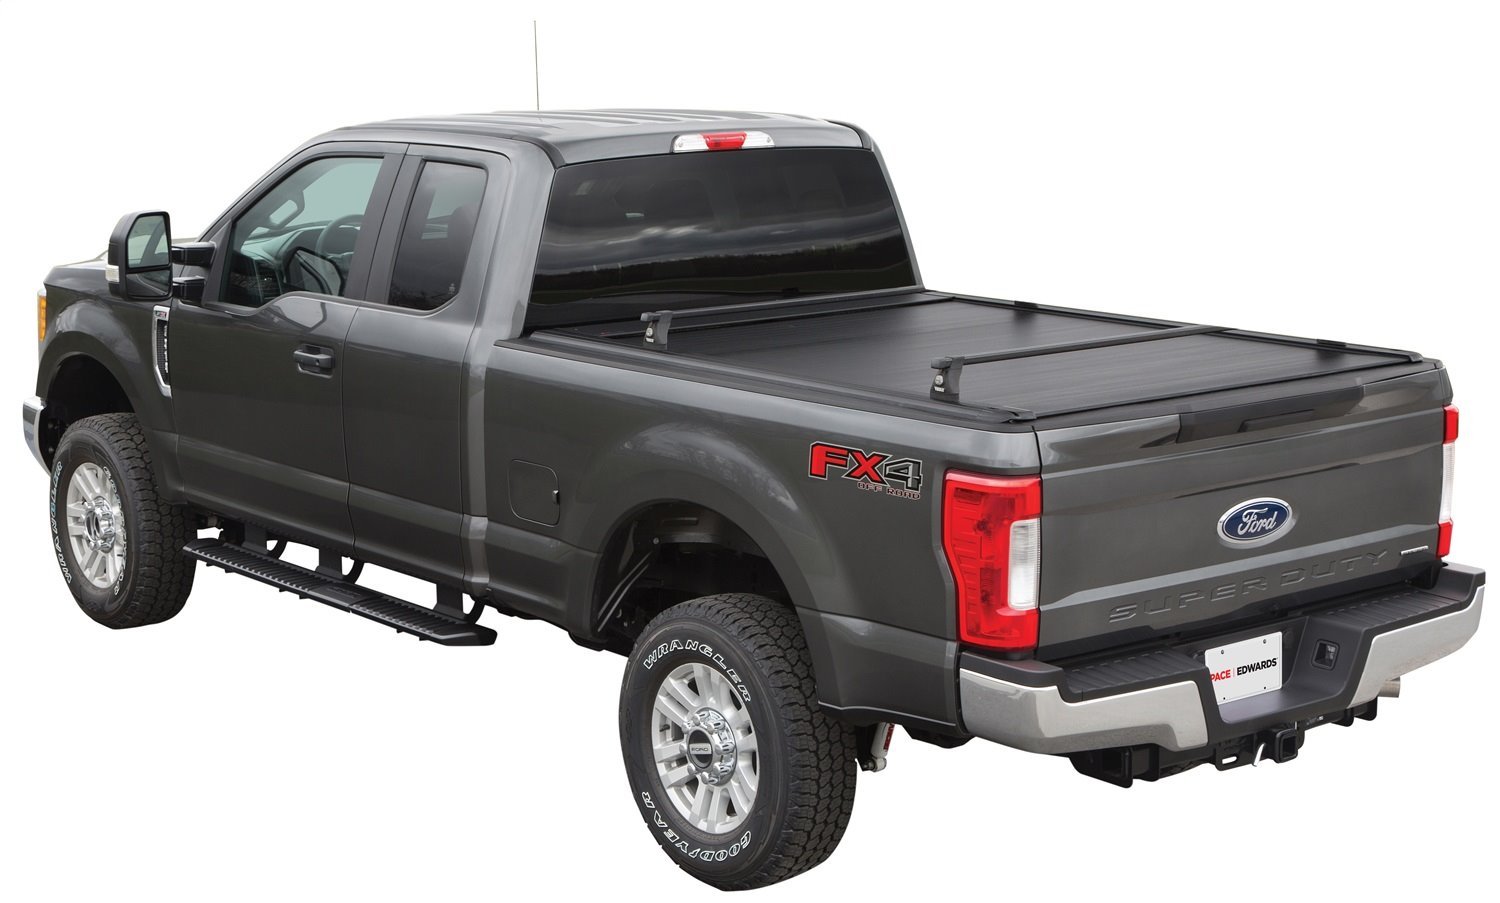 KMF171 UltraGroove Metal Tonneau Cover Kit for 2021 Ford F-150, 2022-2023 Ford F-150